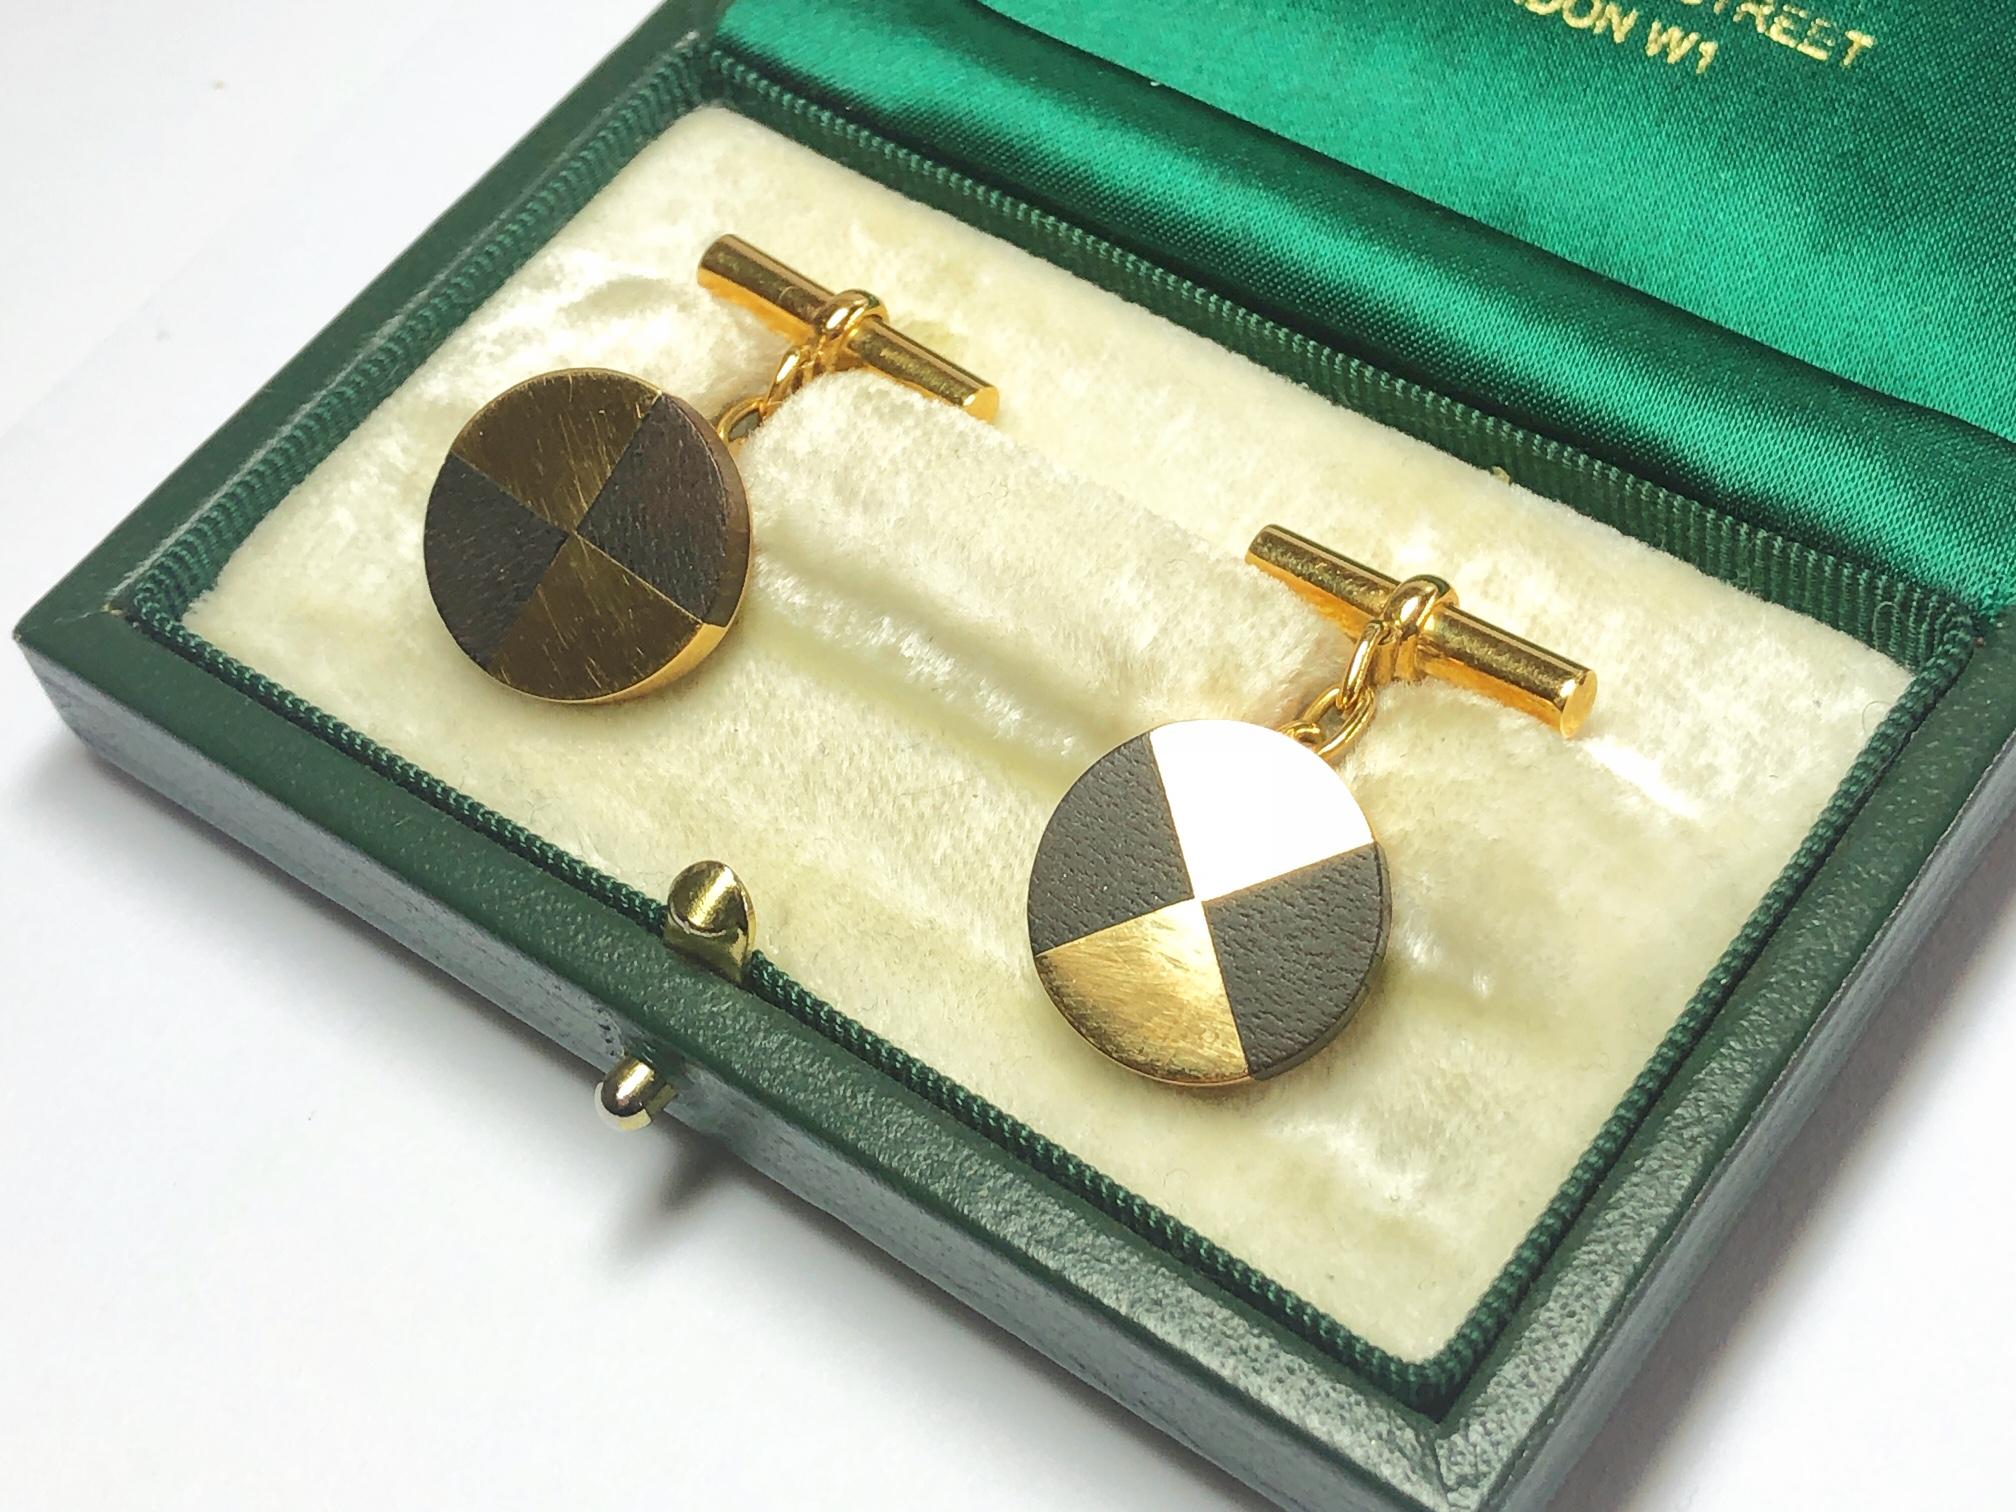 A pair of vintage Mellerio cufflinks, set with two sections of dark wood and two alternate sections of 18ct gold, in circular discs, signed Mellerio, with chain link connections and a bar on the other end, with French eagle marks for 18ct gold,